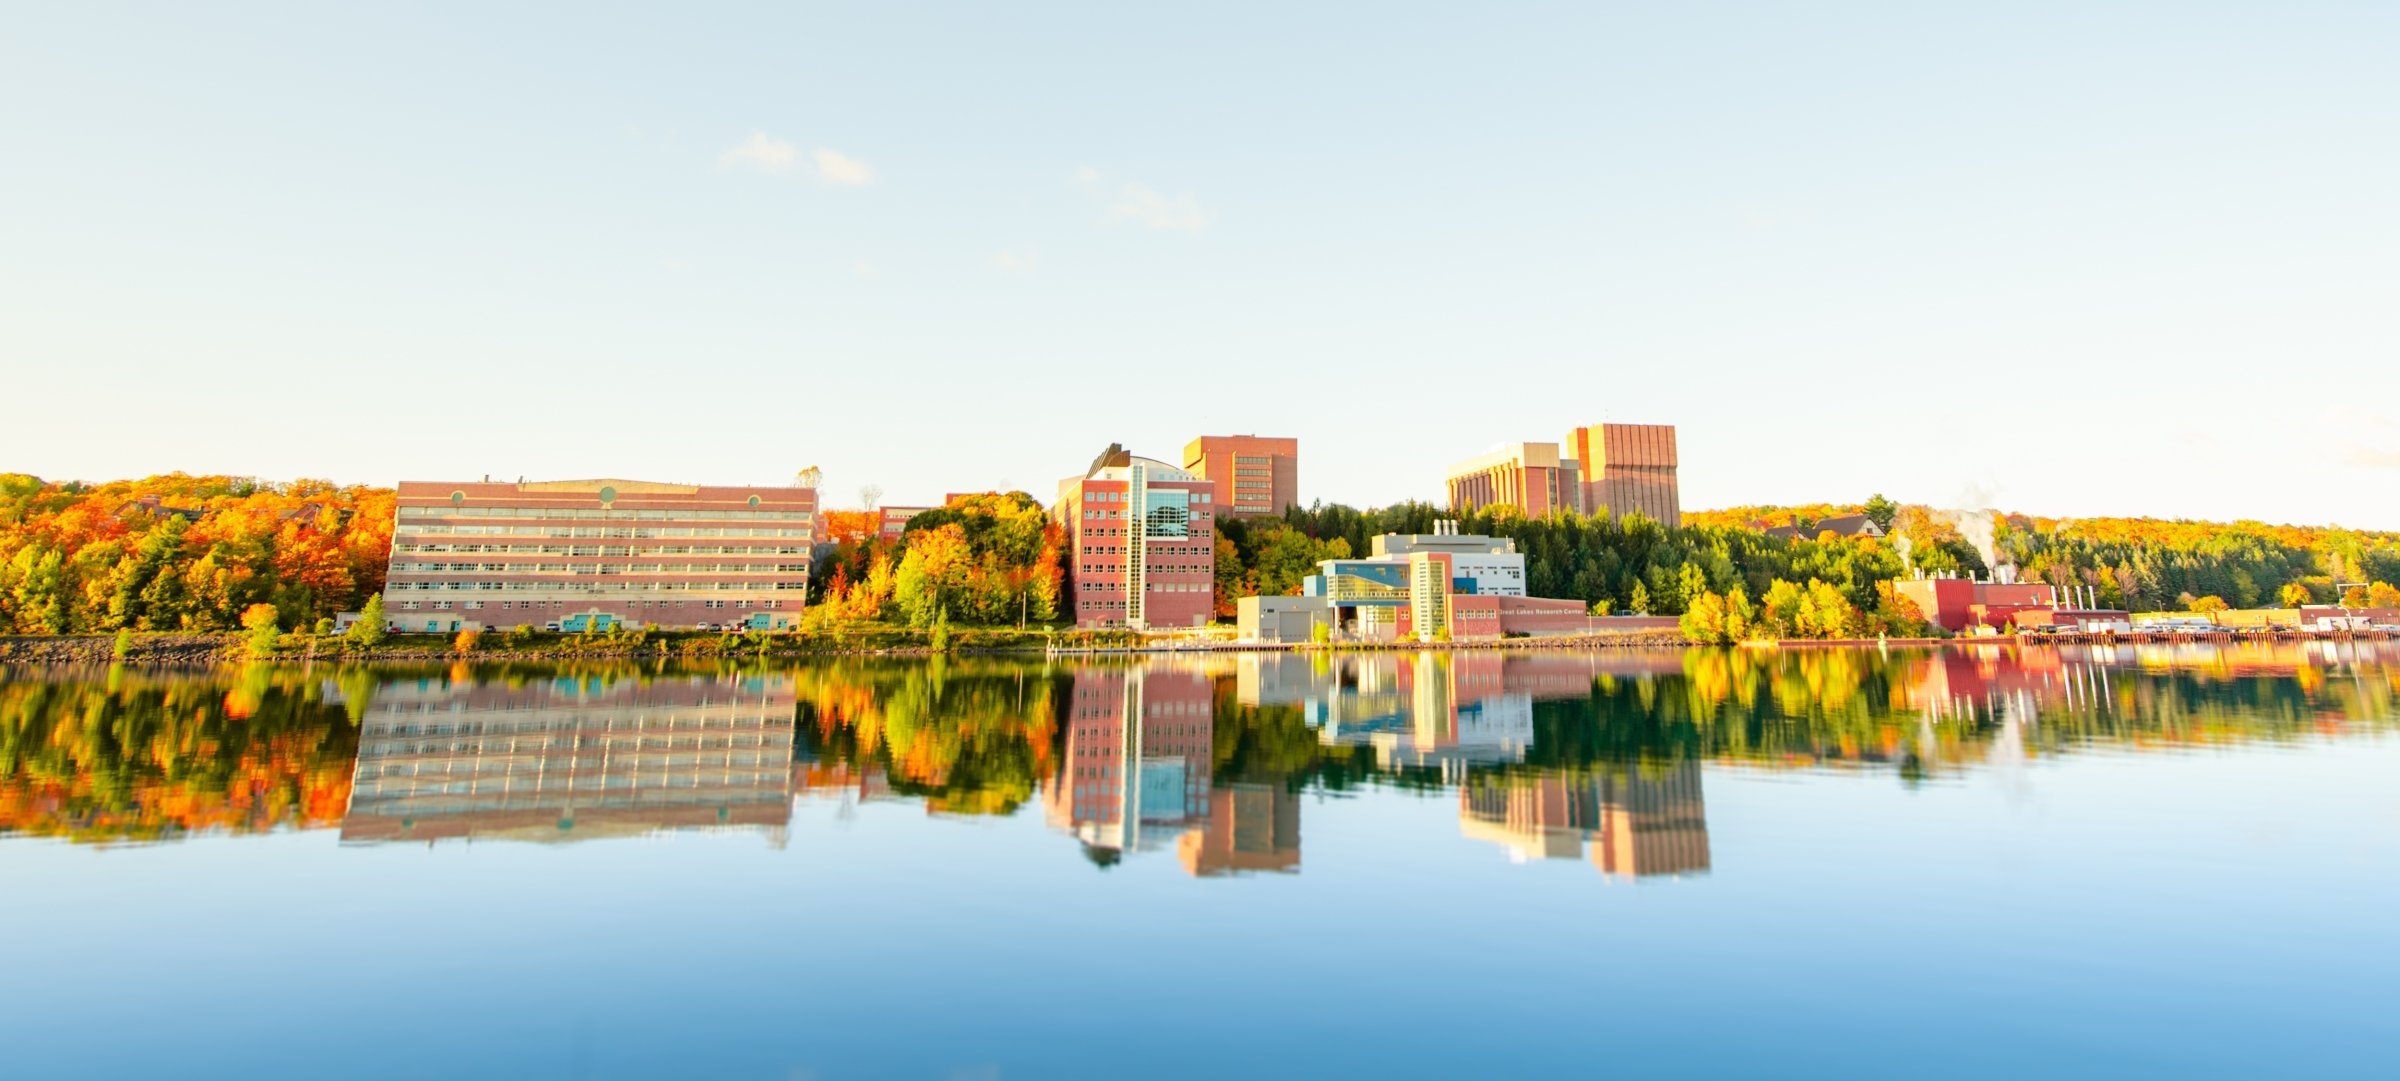 A view of the Michigan Tech campus from across the waterway.